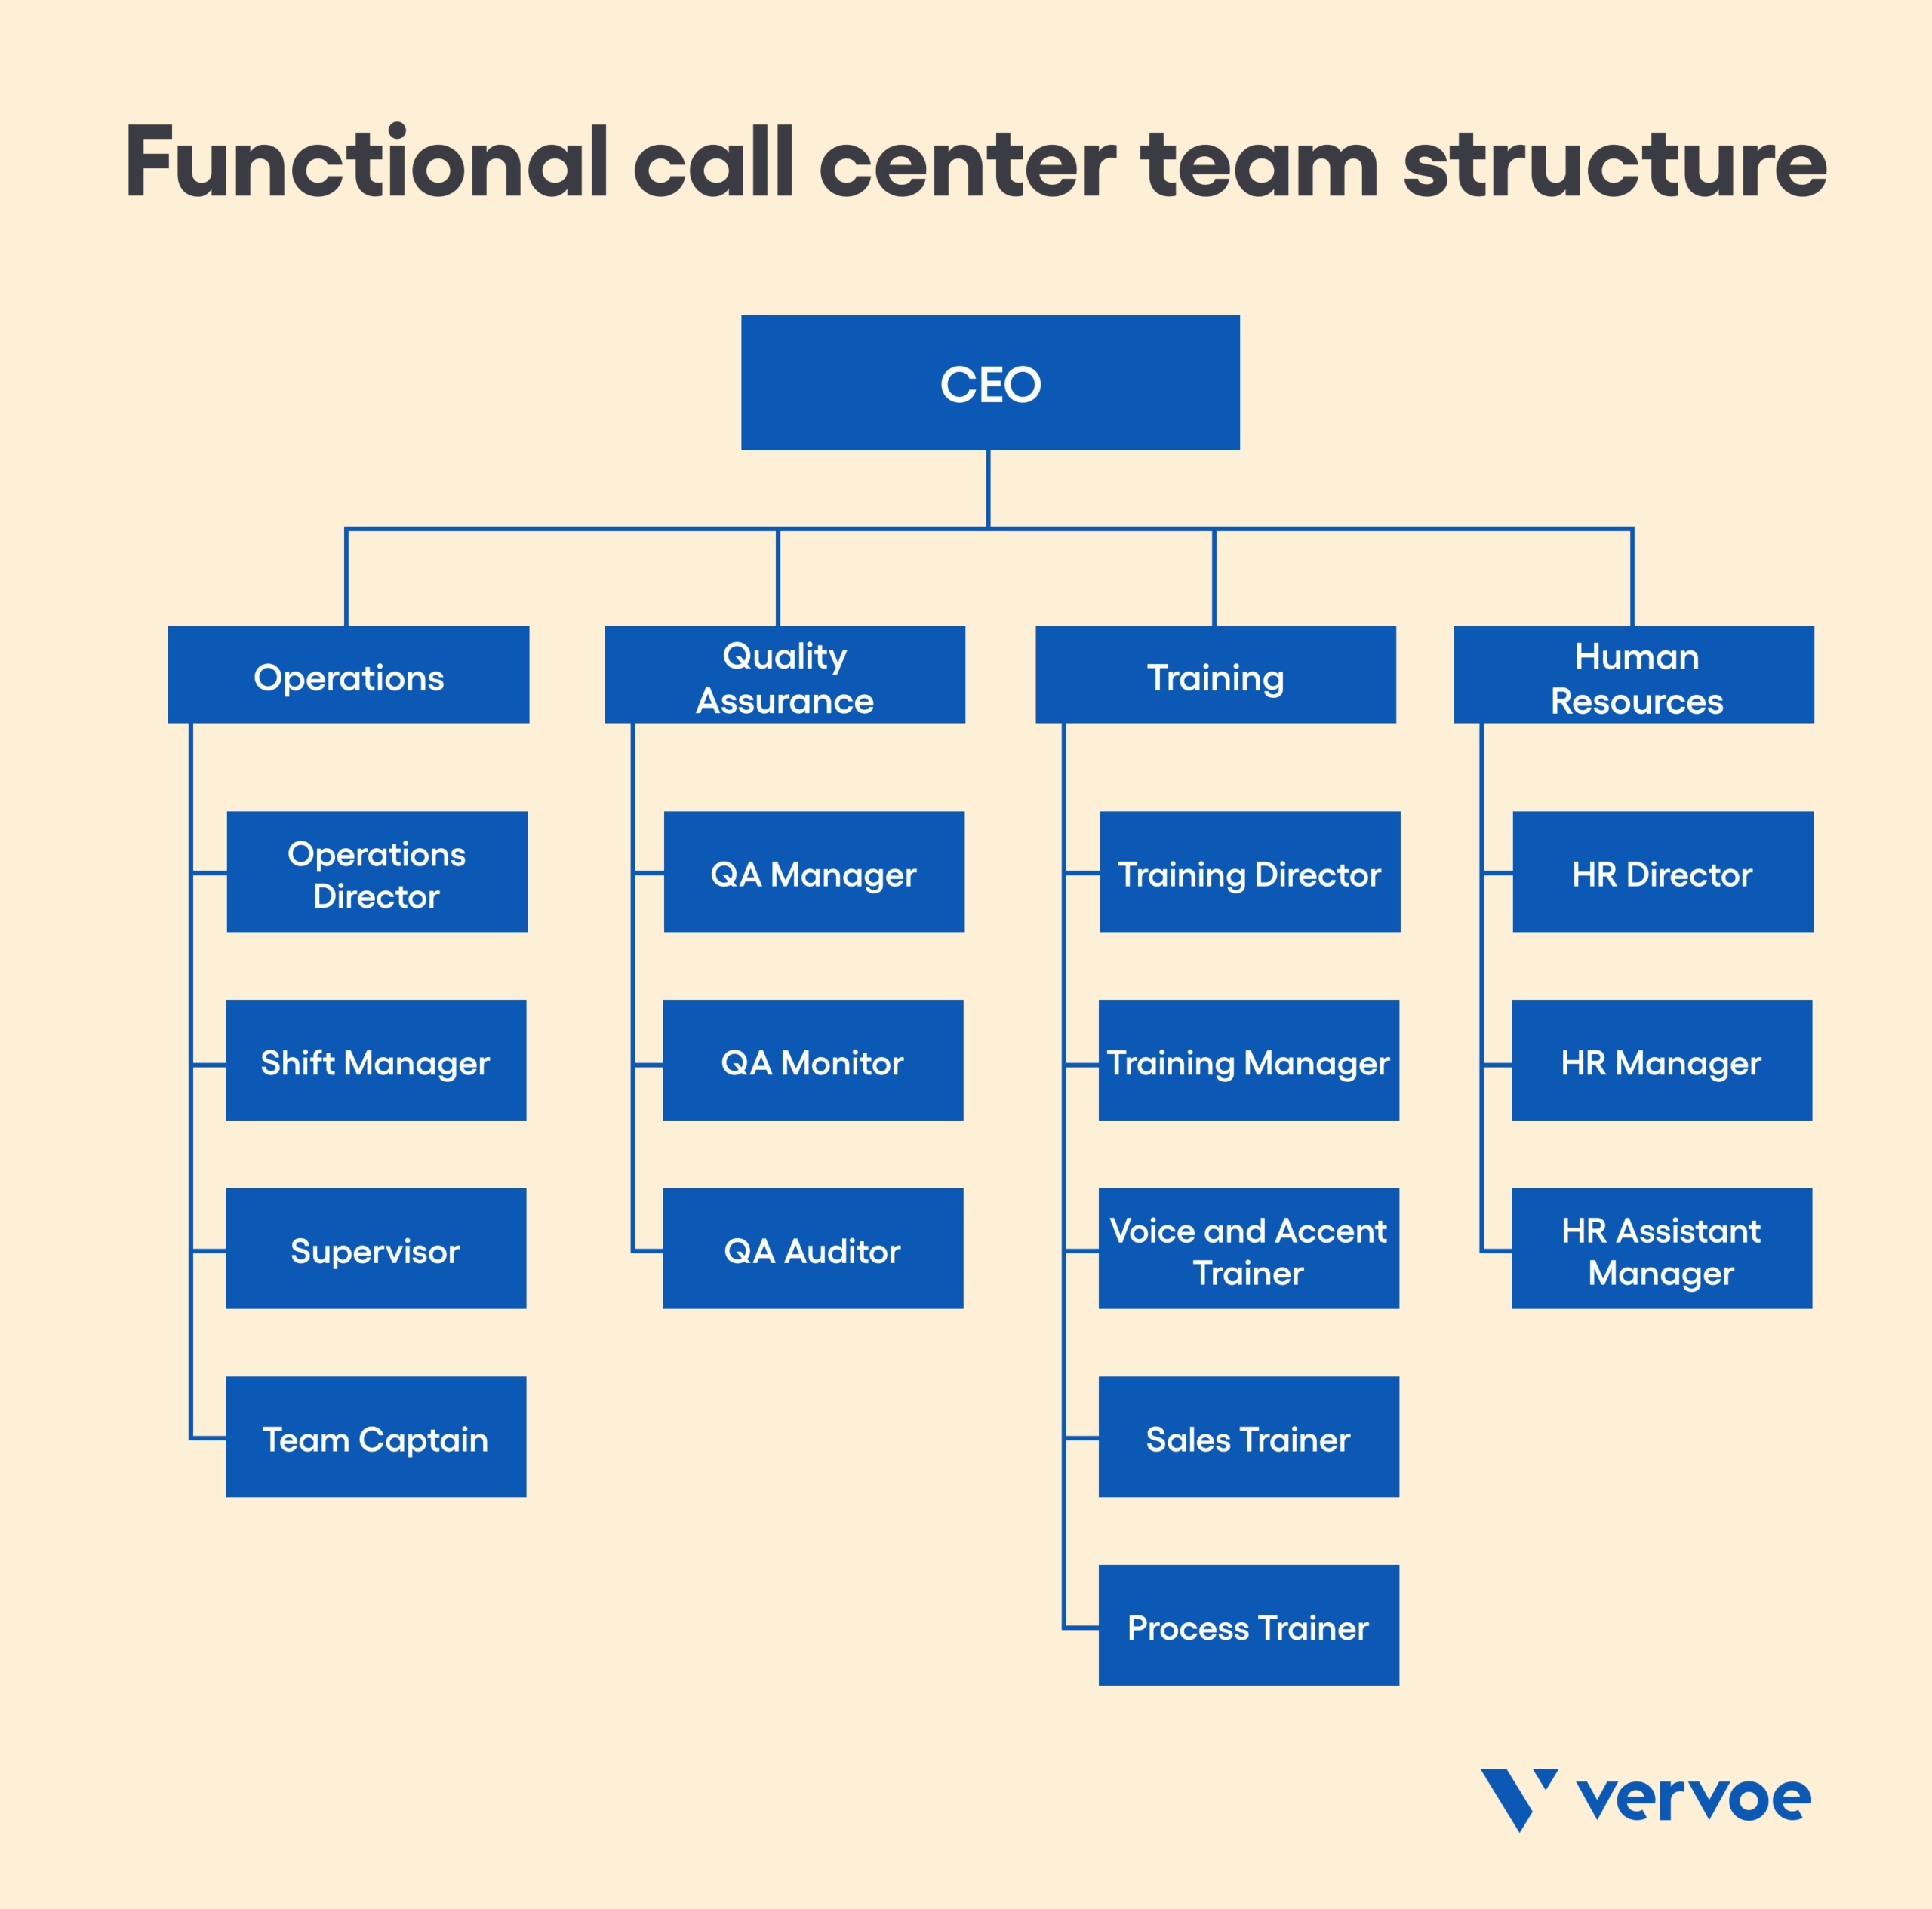 Functional call center team structure